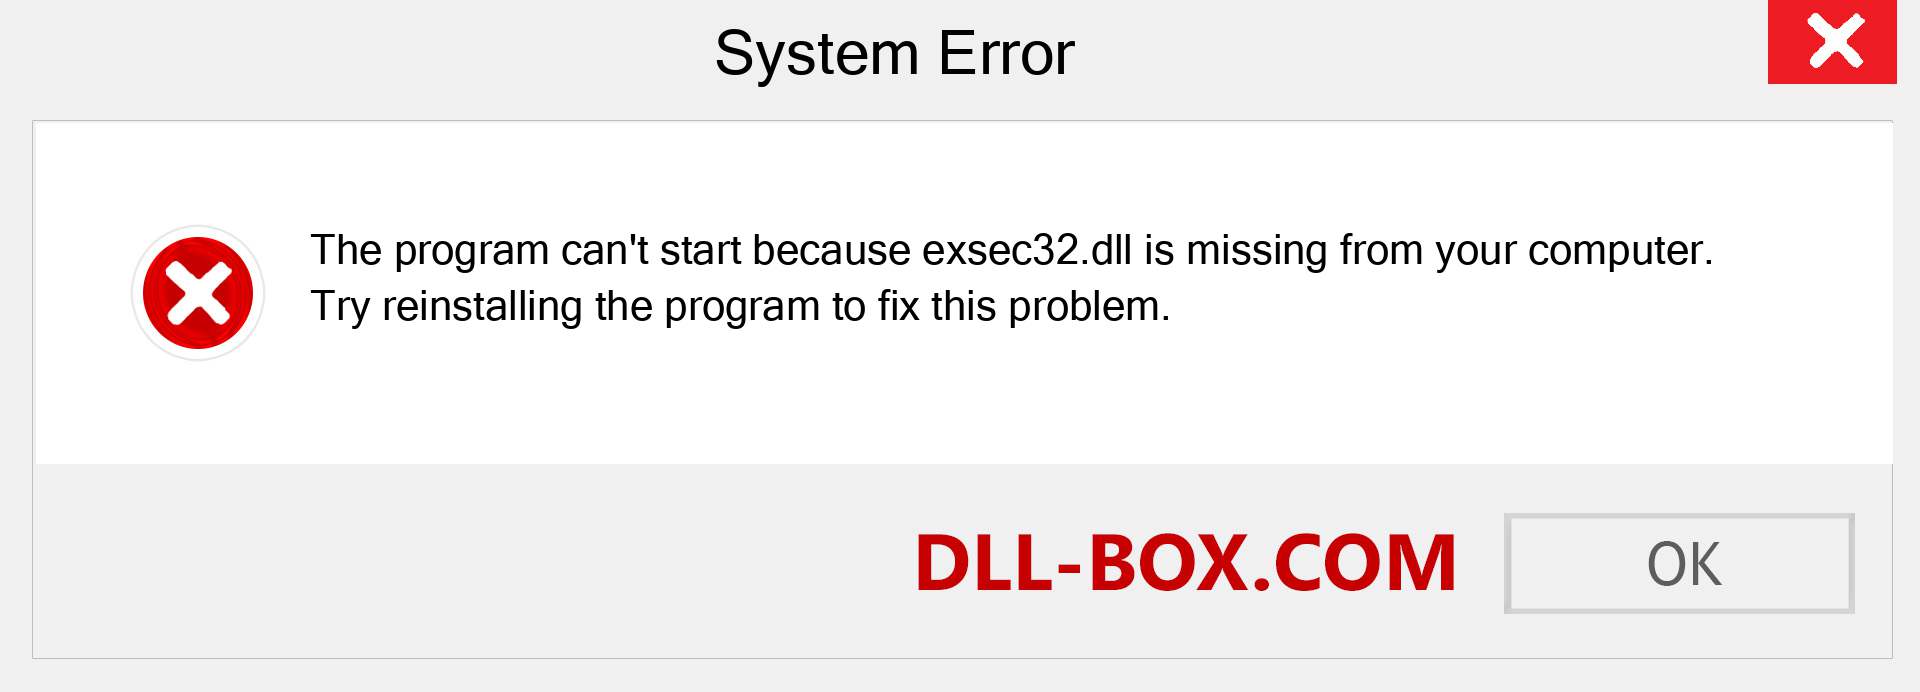  exsec32.dll file is missing?. Download for Windows 7, 8, 10 - Fix  exsec32 dll Missing Error on Windows, photos, images